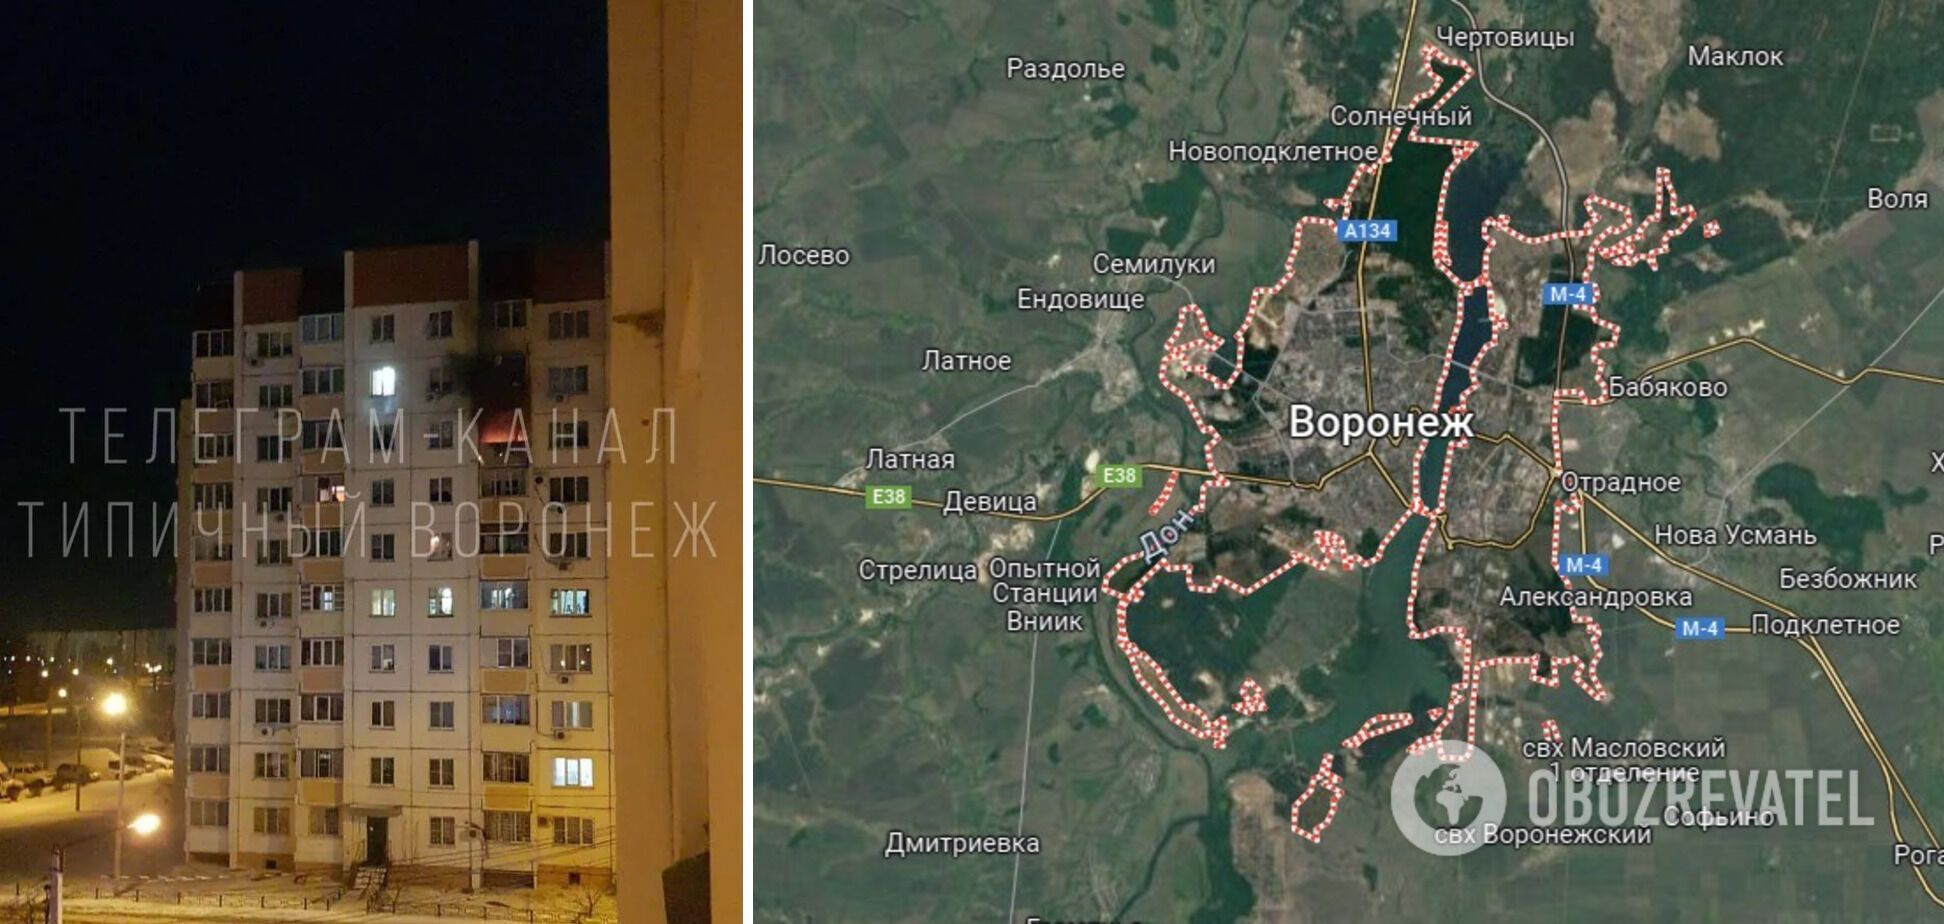 ''Everything goes according to the plan'': Russians threw a tantrum after drone attack on Voronezh, bashing Putin